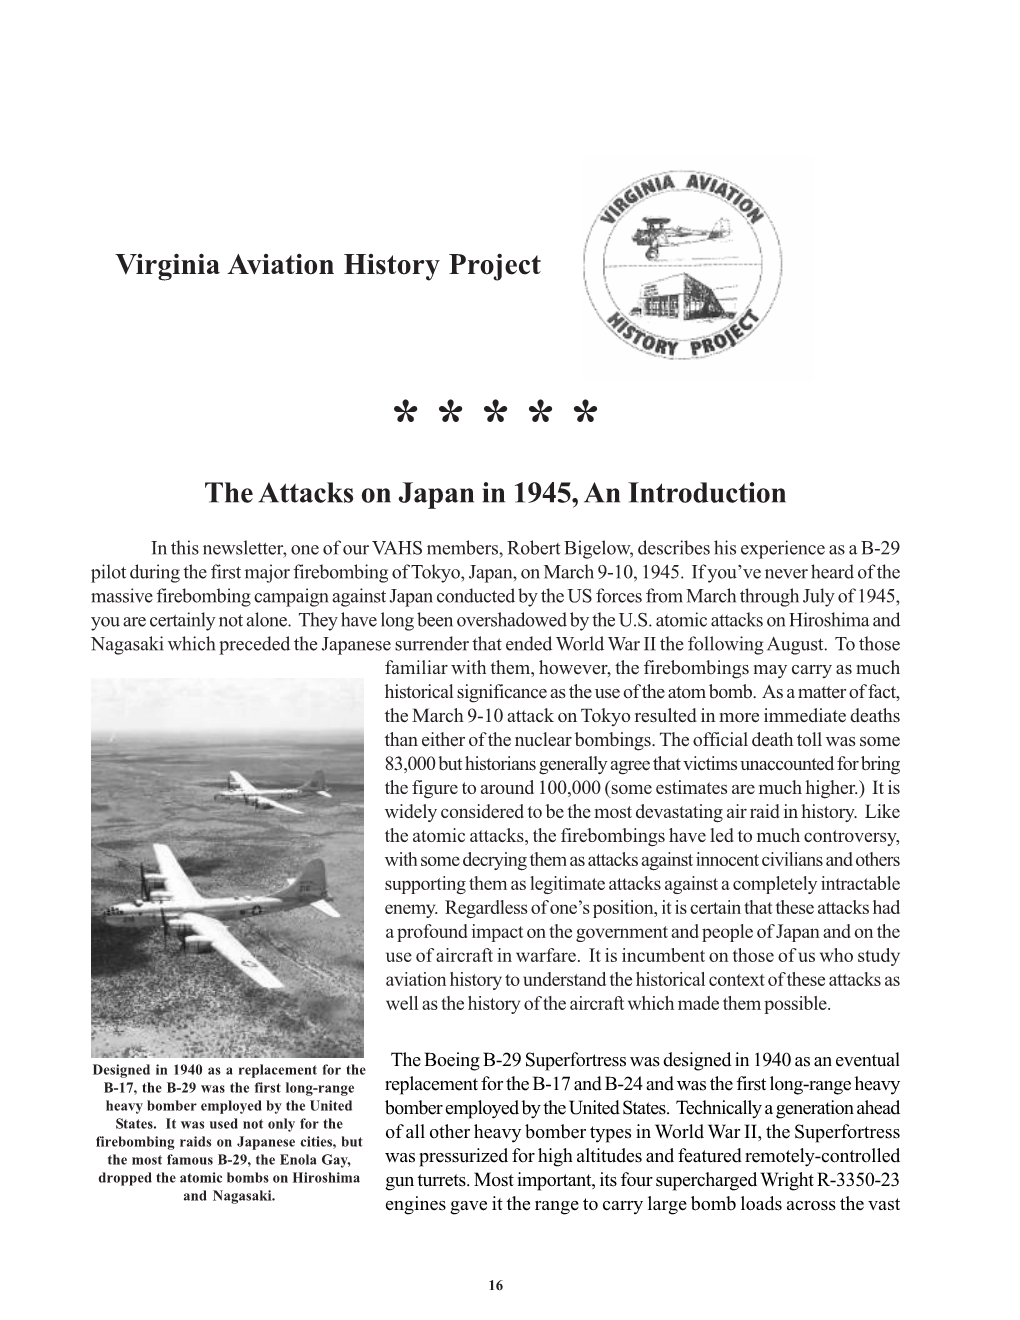 The Attacks on Japan in 1945, an Introduction